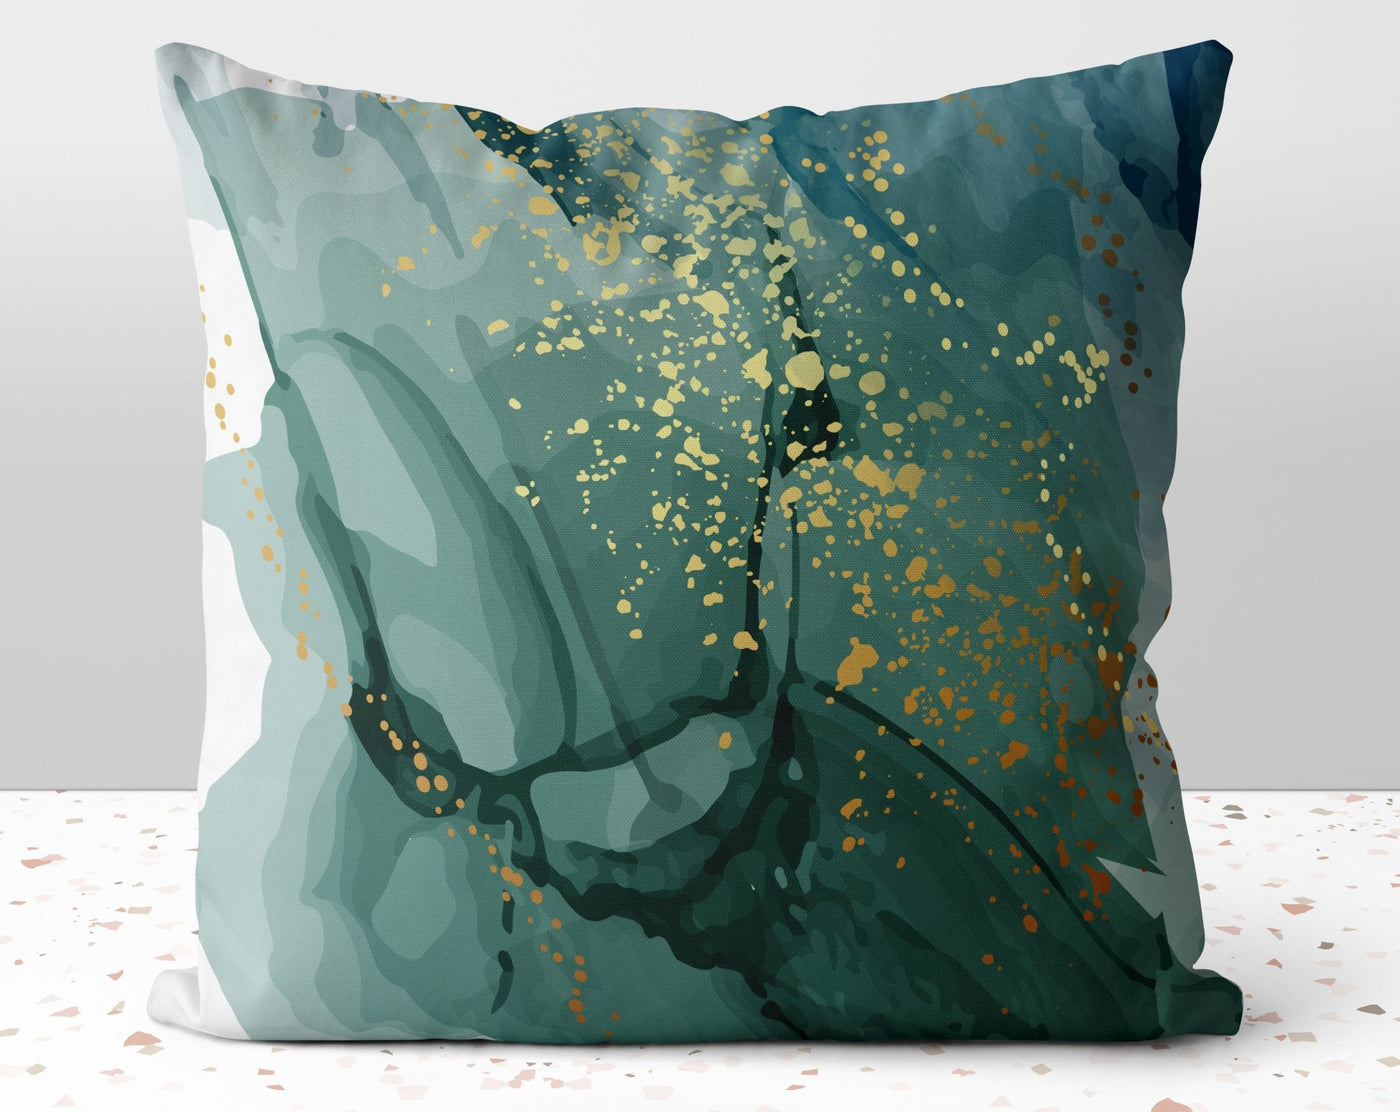 Abstract Emerald Green Square Pillow with Gold Printed Accents with Cover Throw with Insert - Cush Potato Pillows